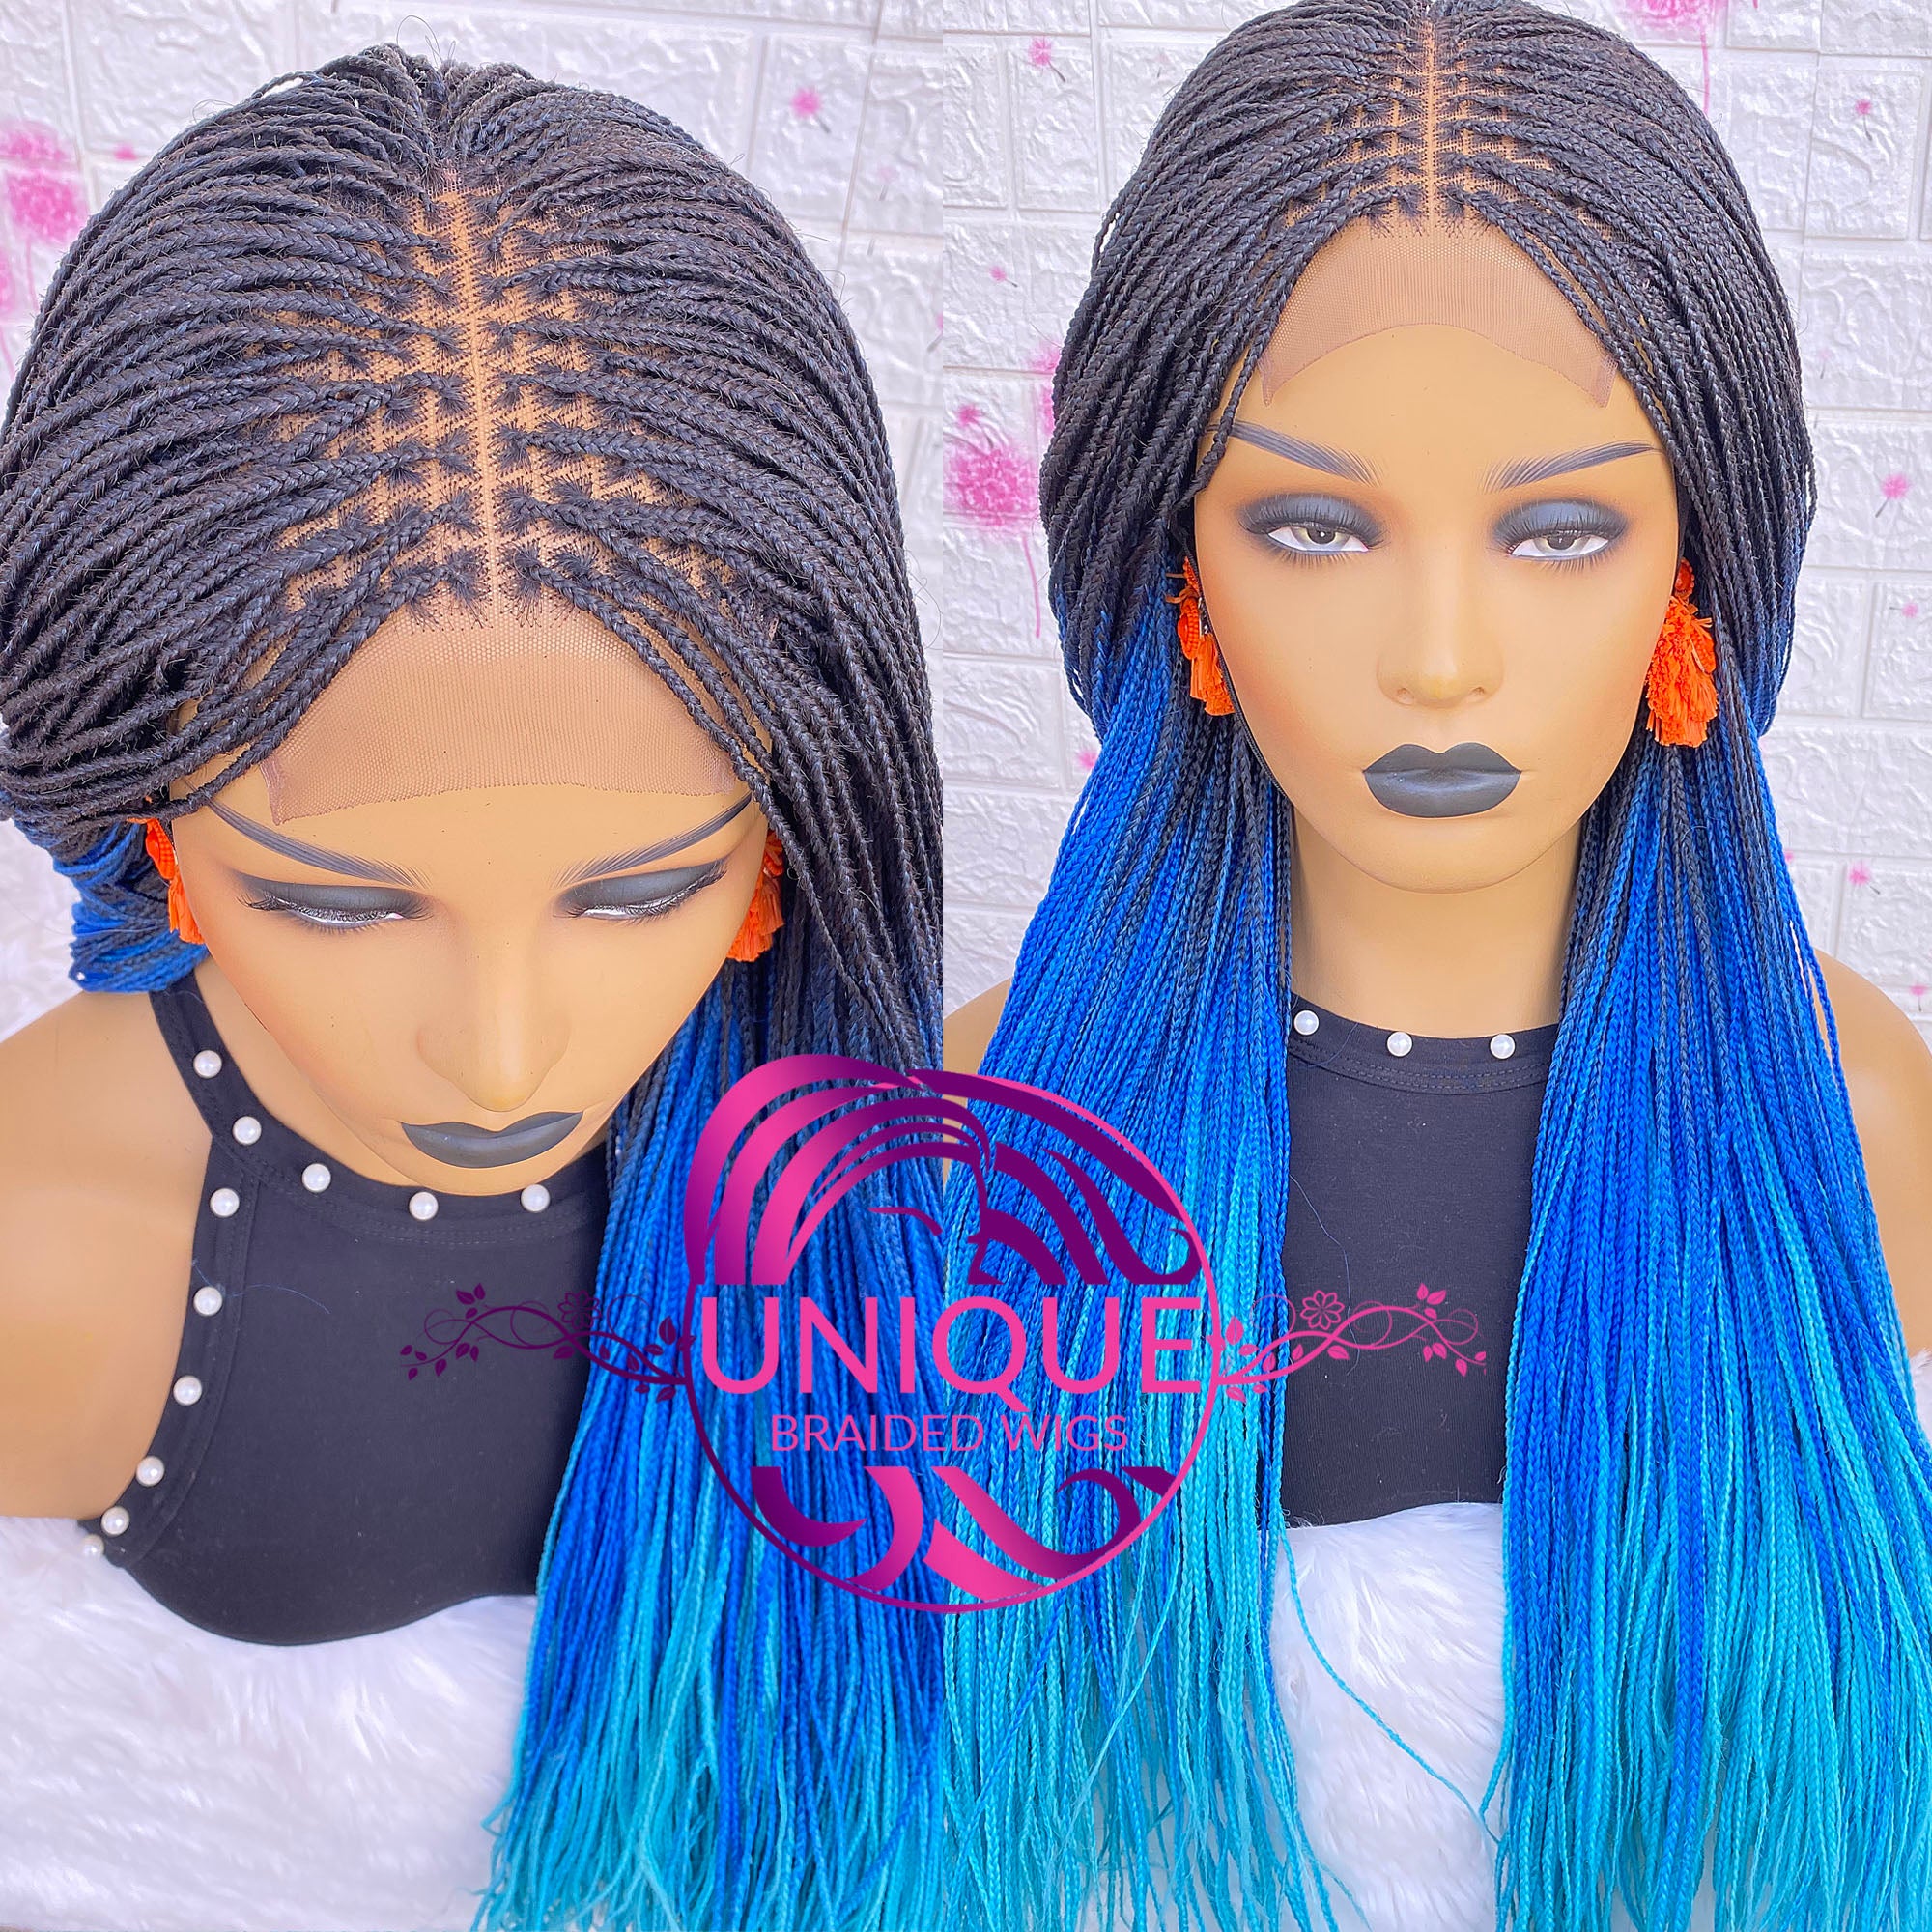 Ombre Tone Knotless Braid Wig - Ade